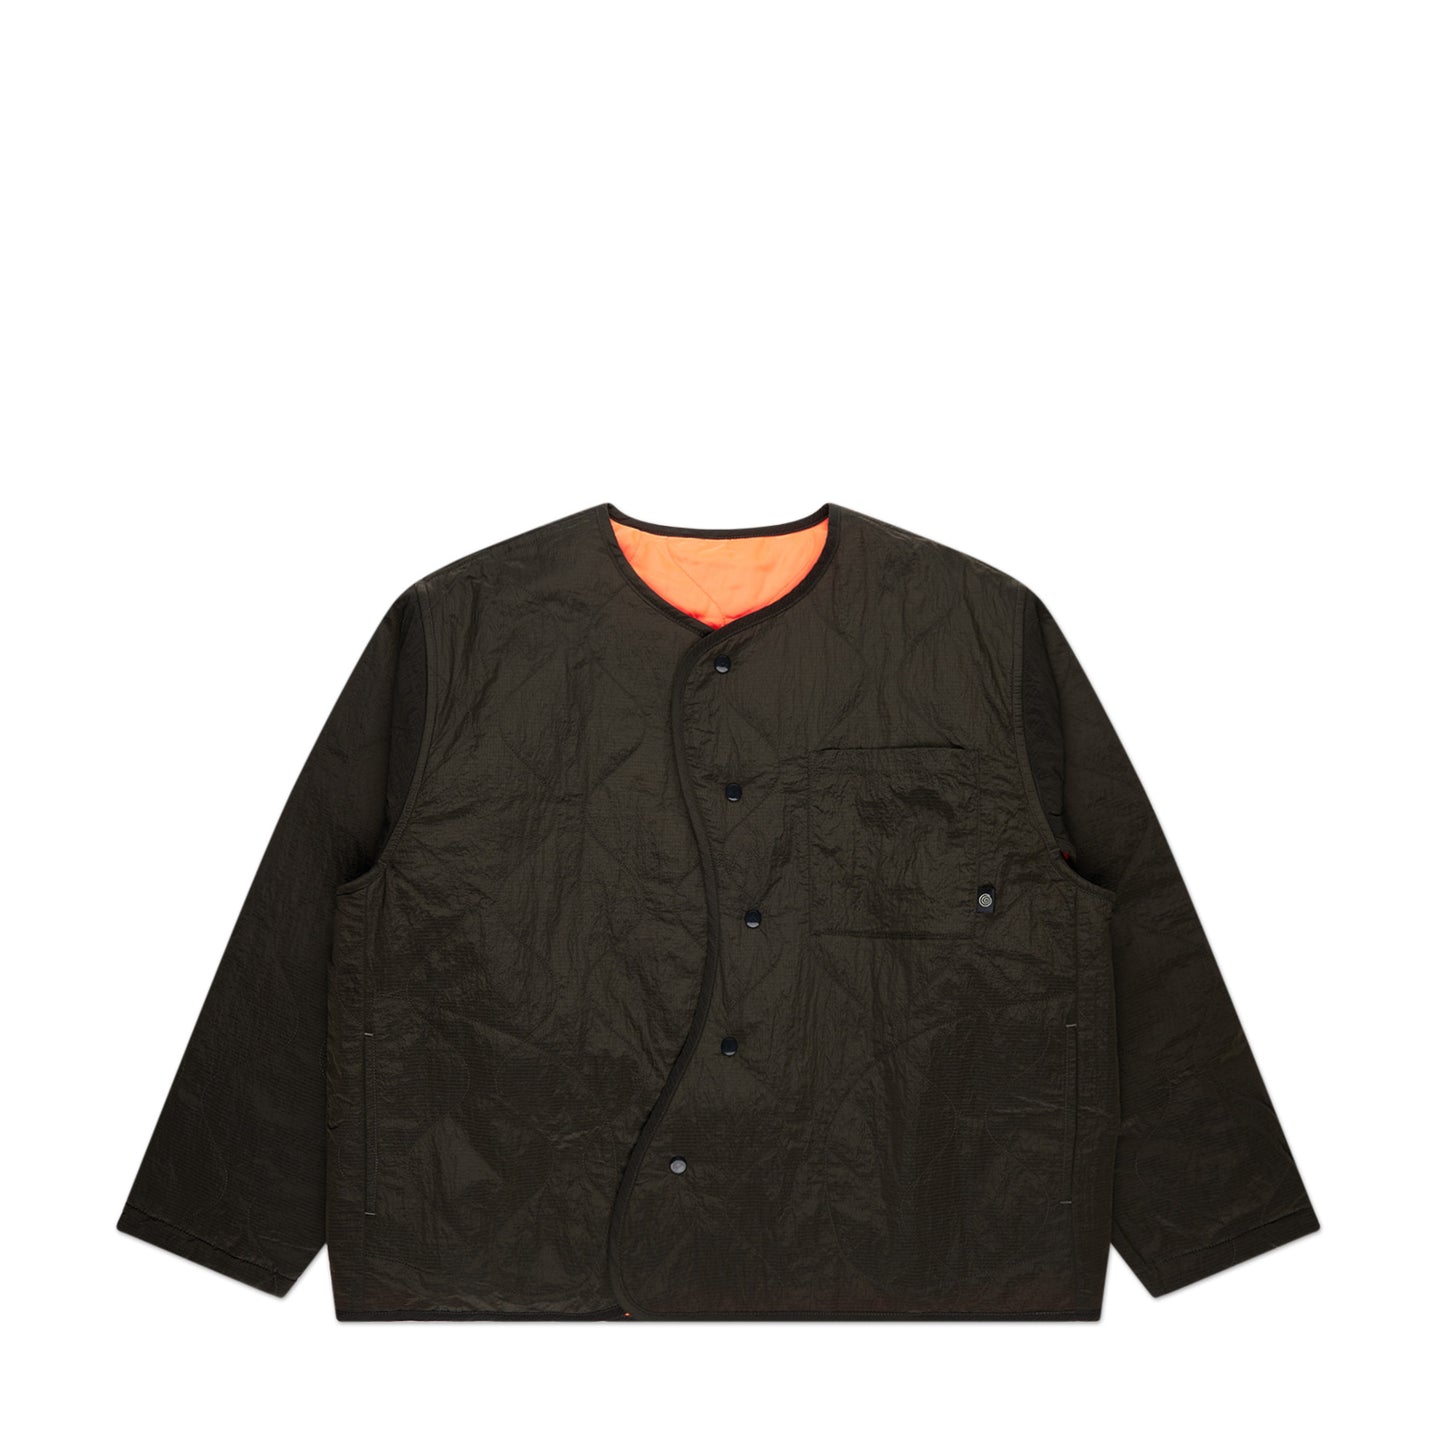 perks and mini blur the lines reversible liner jacket (dark olive)